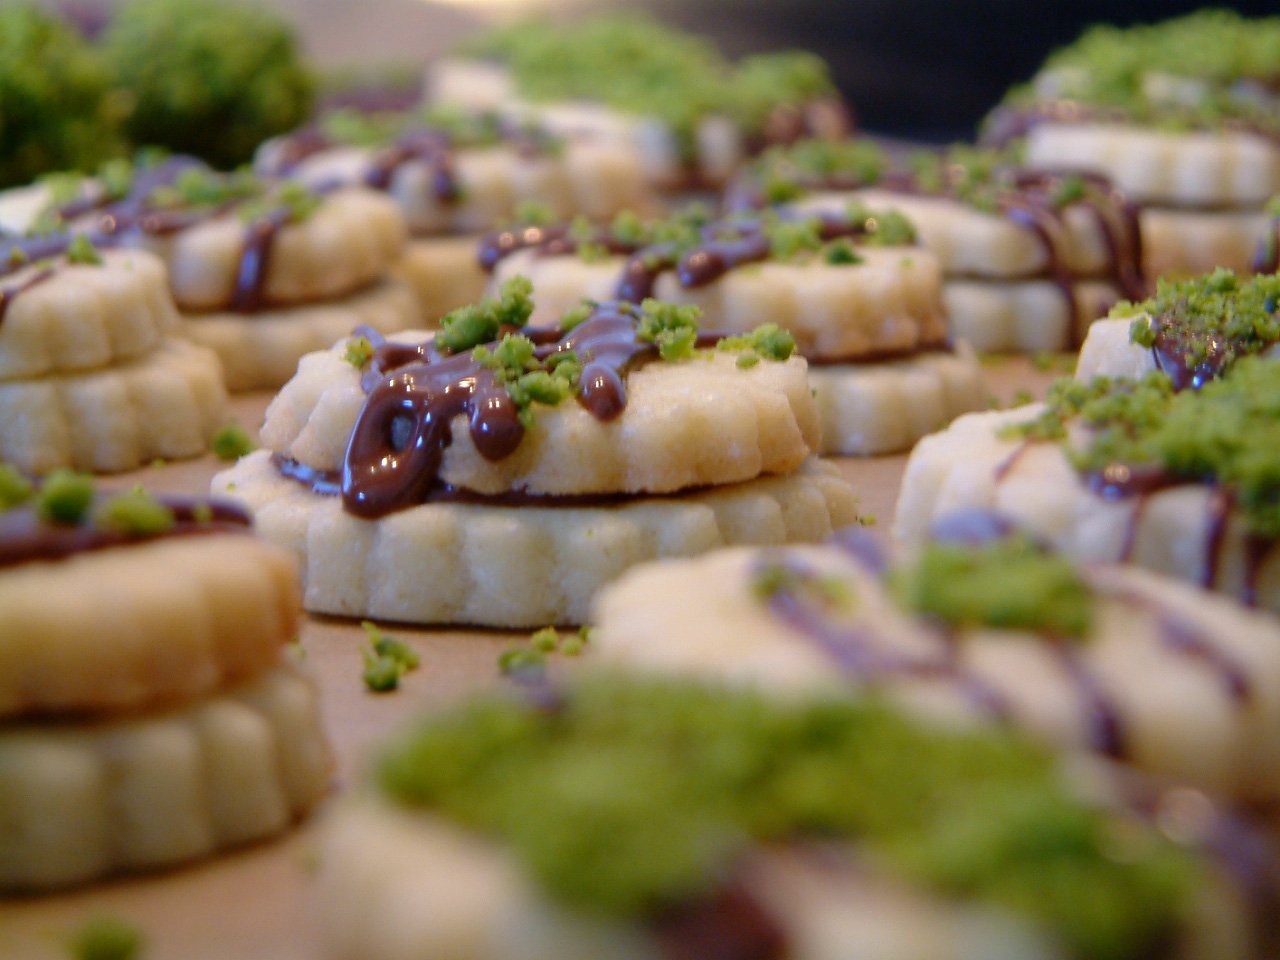 the appetizers are covered with green and purple candies